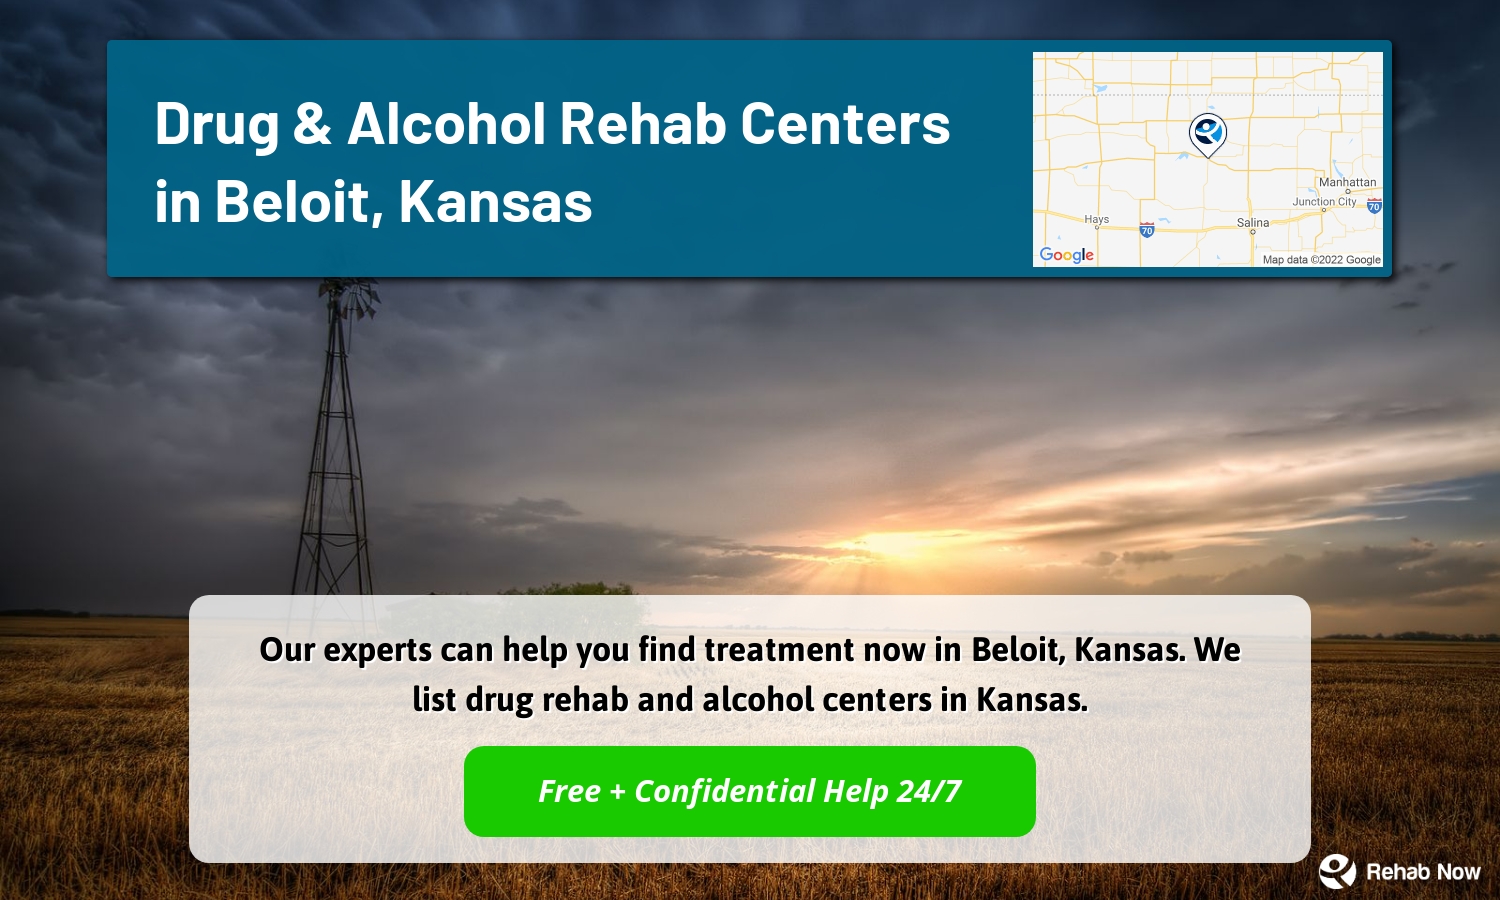 Our experts can help you find treatment now in Beloit, Kansas. We list drug rehab and alcohol centers in Kansas.